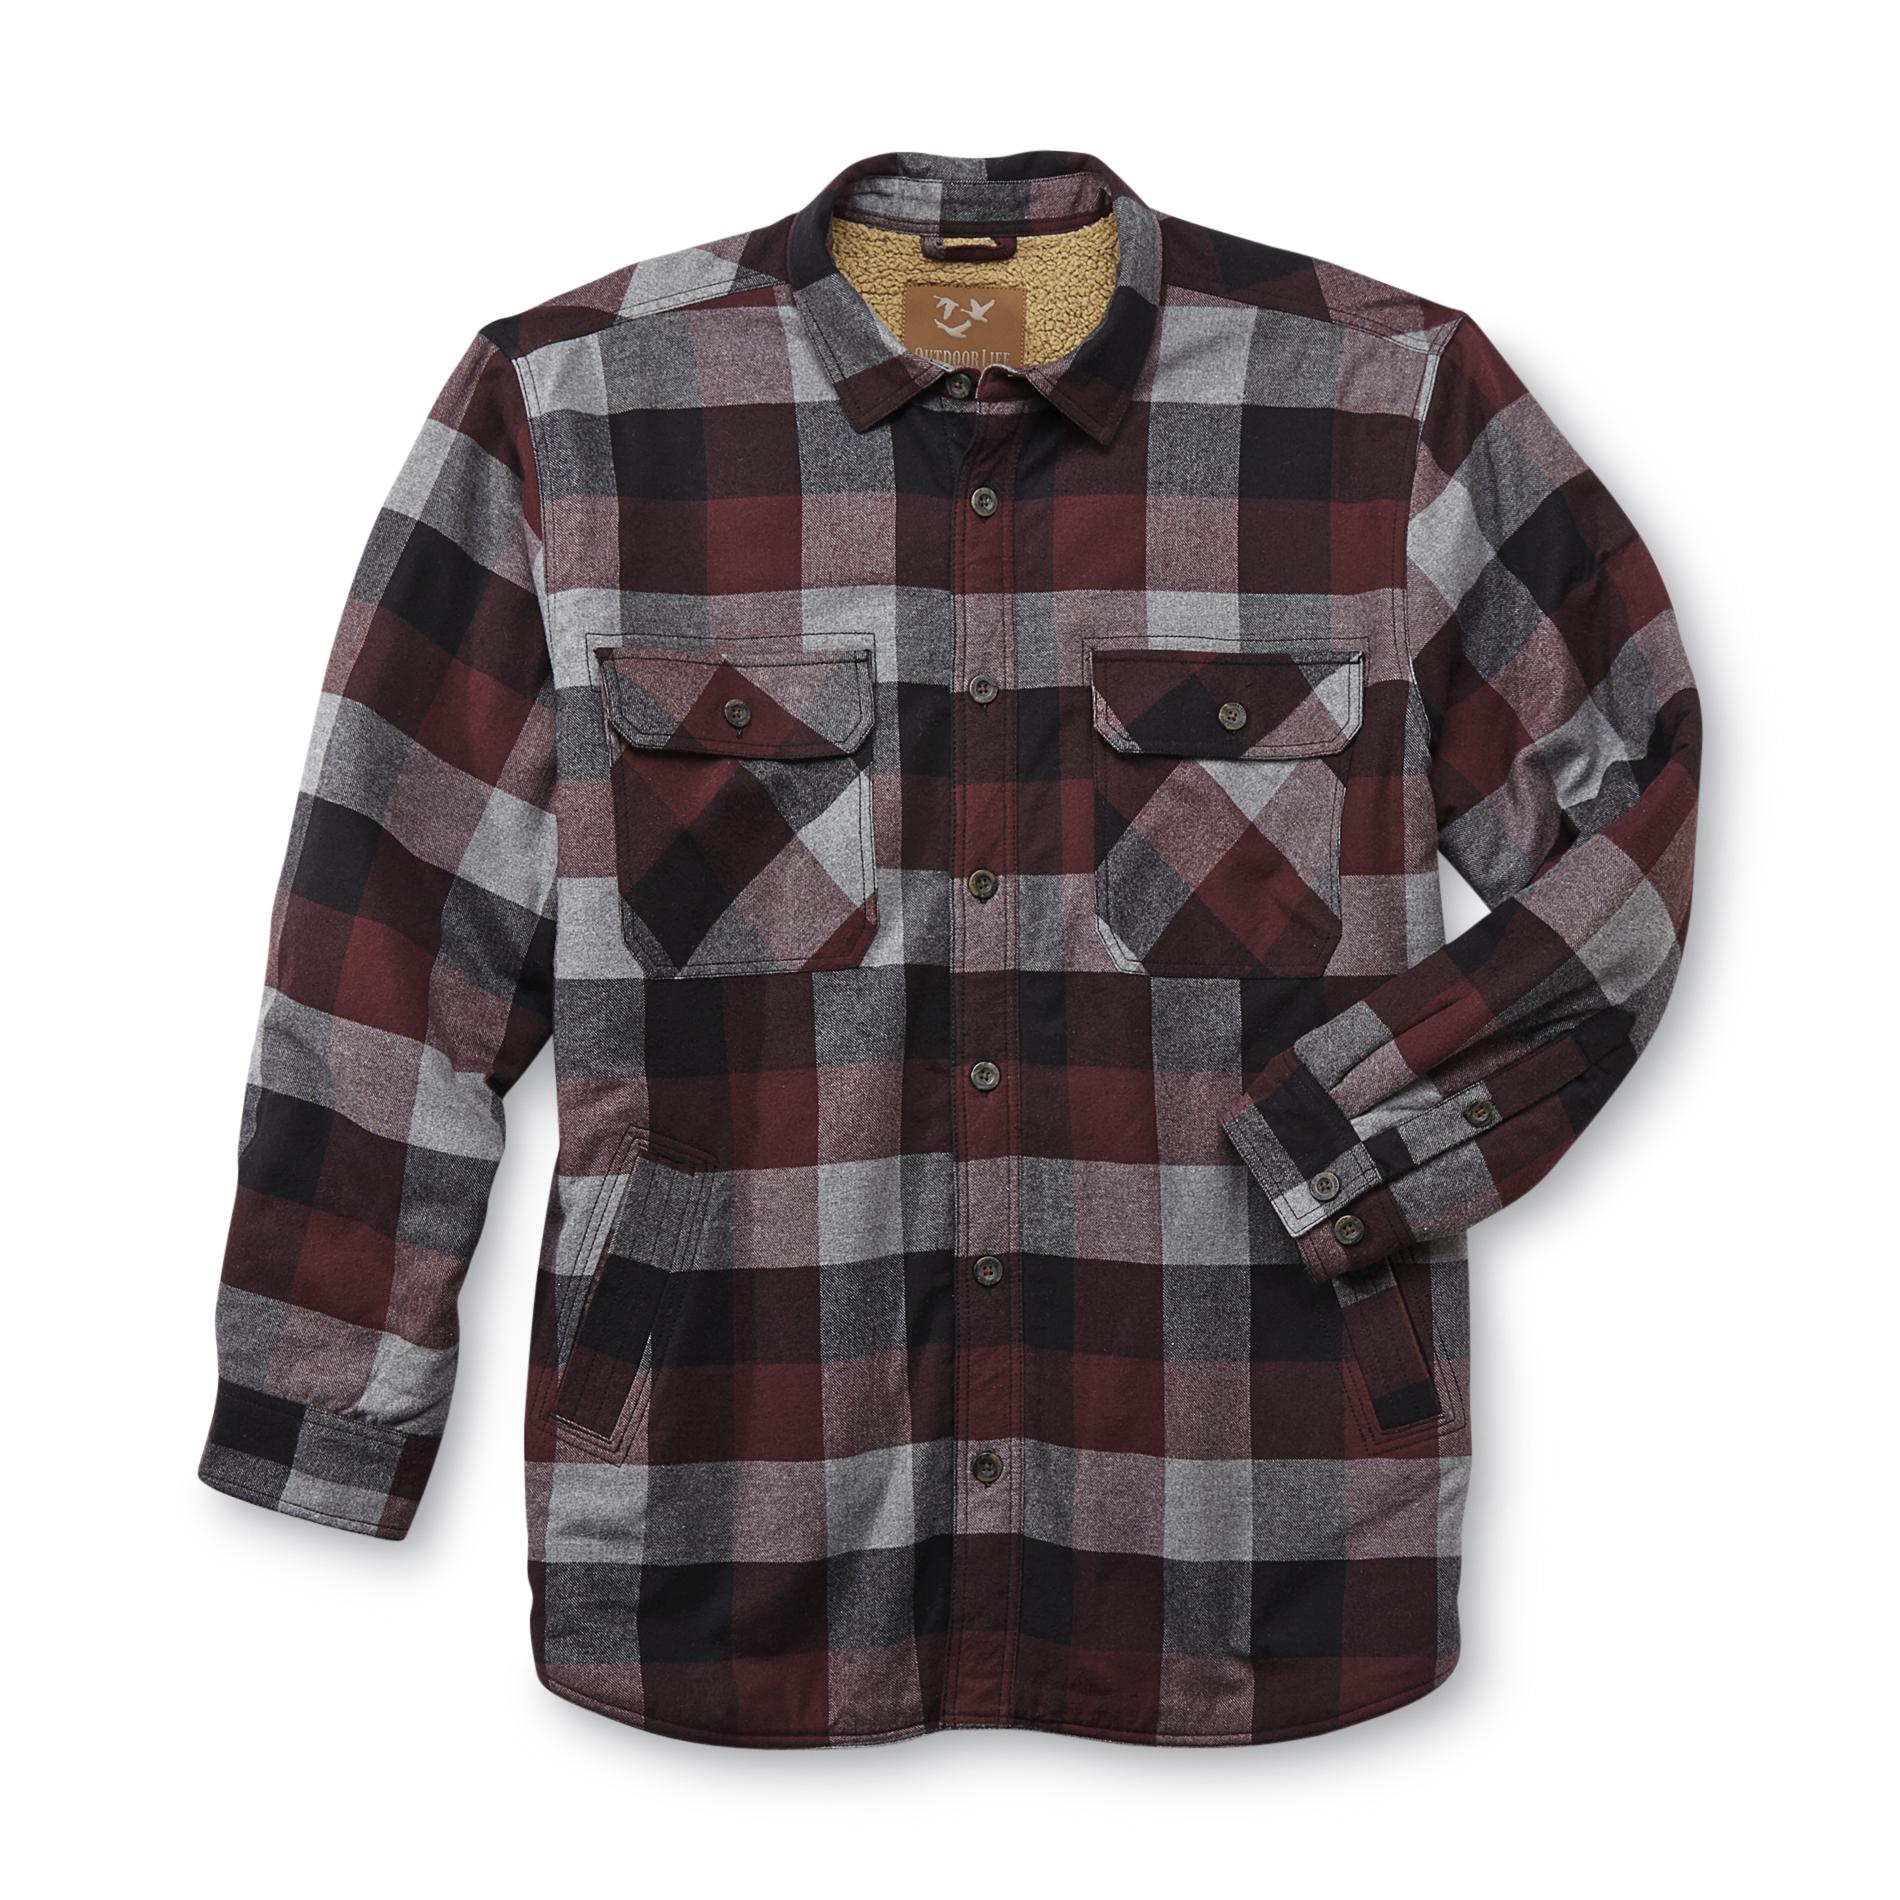 Outdoor Life Men's Big & Tall Sherpa-Lined Flannel Shirt Jacket - Plaid